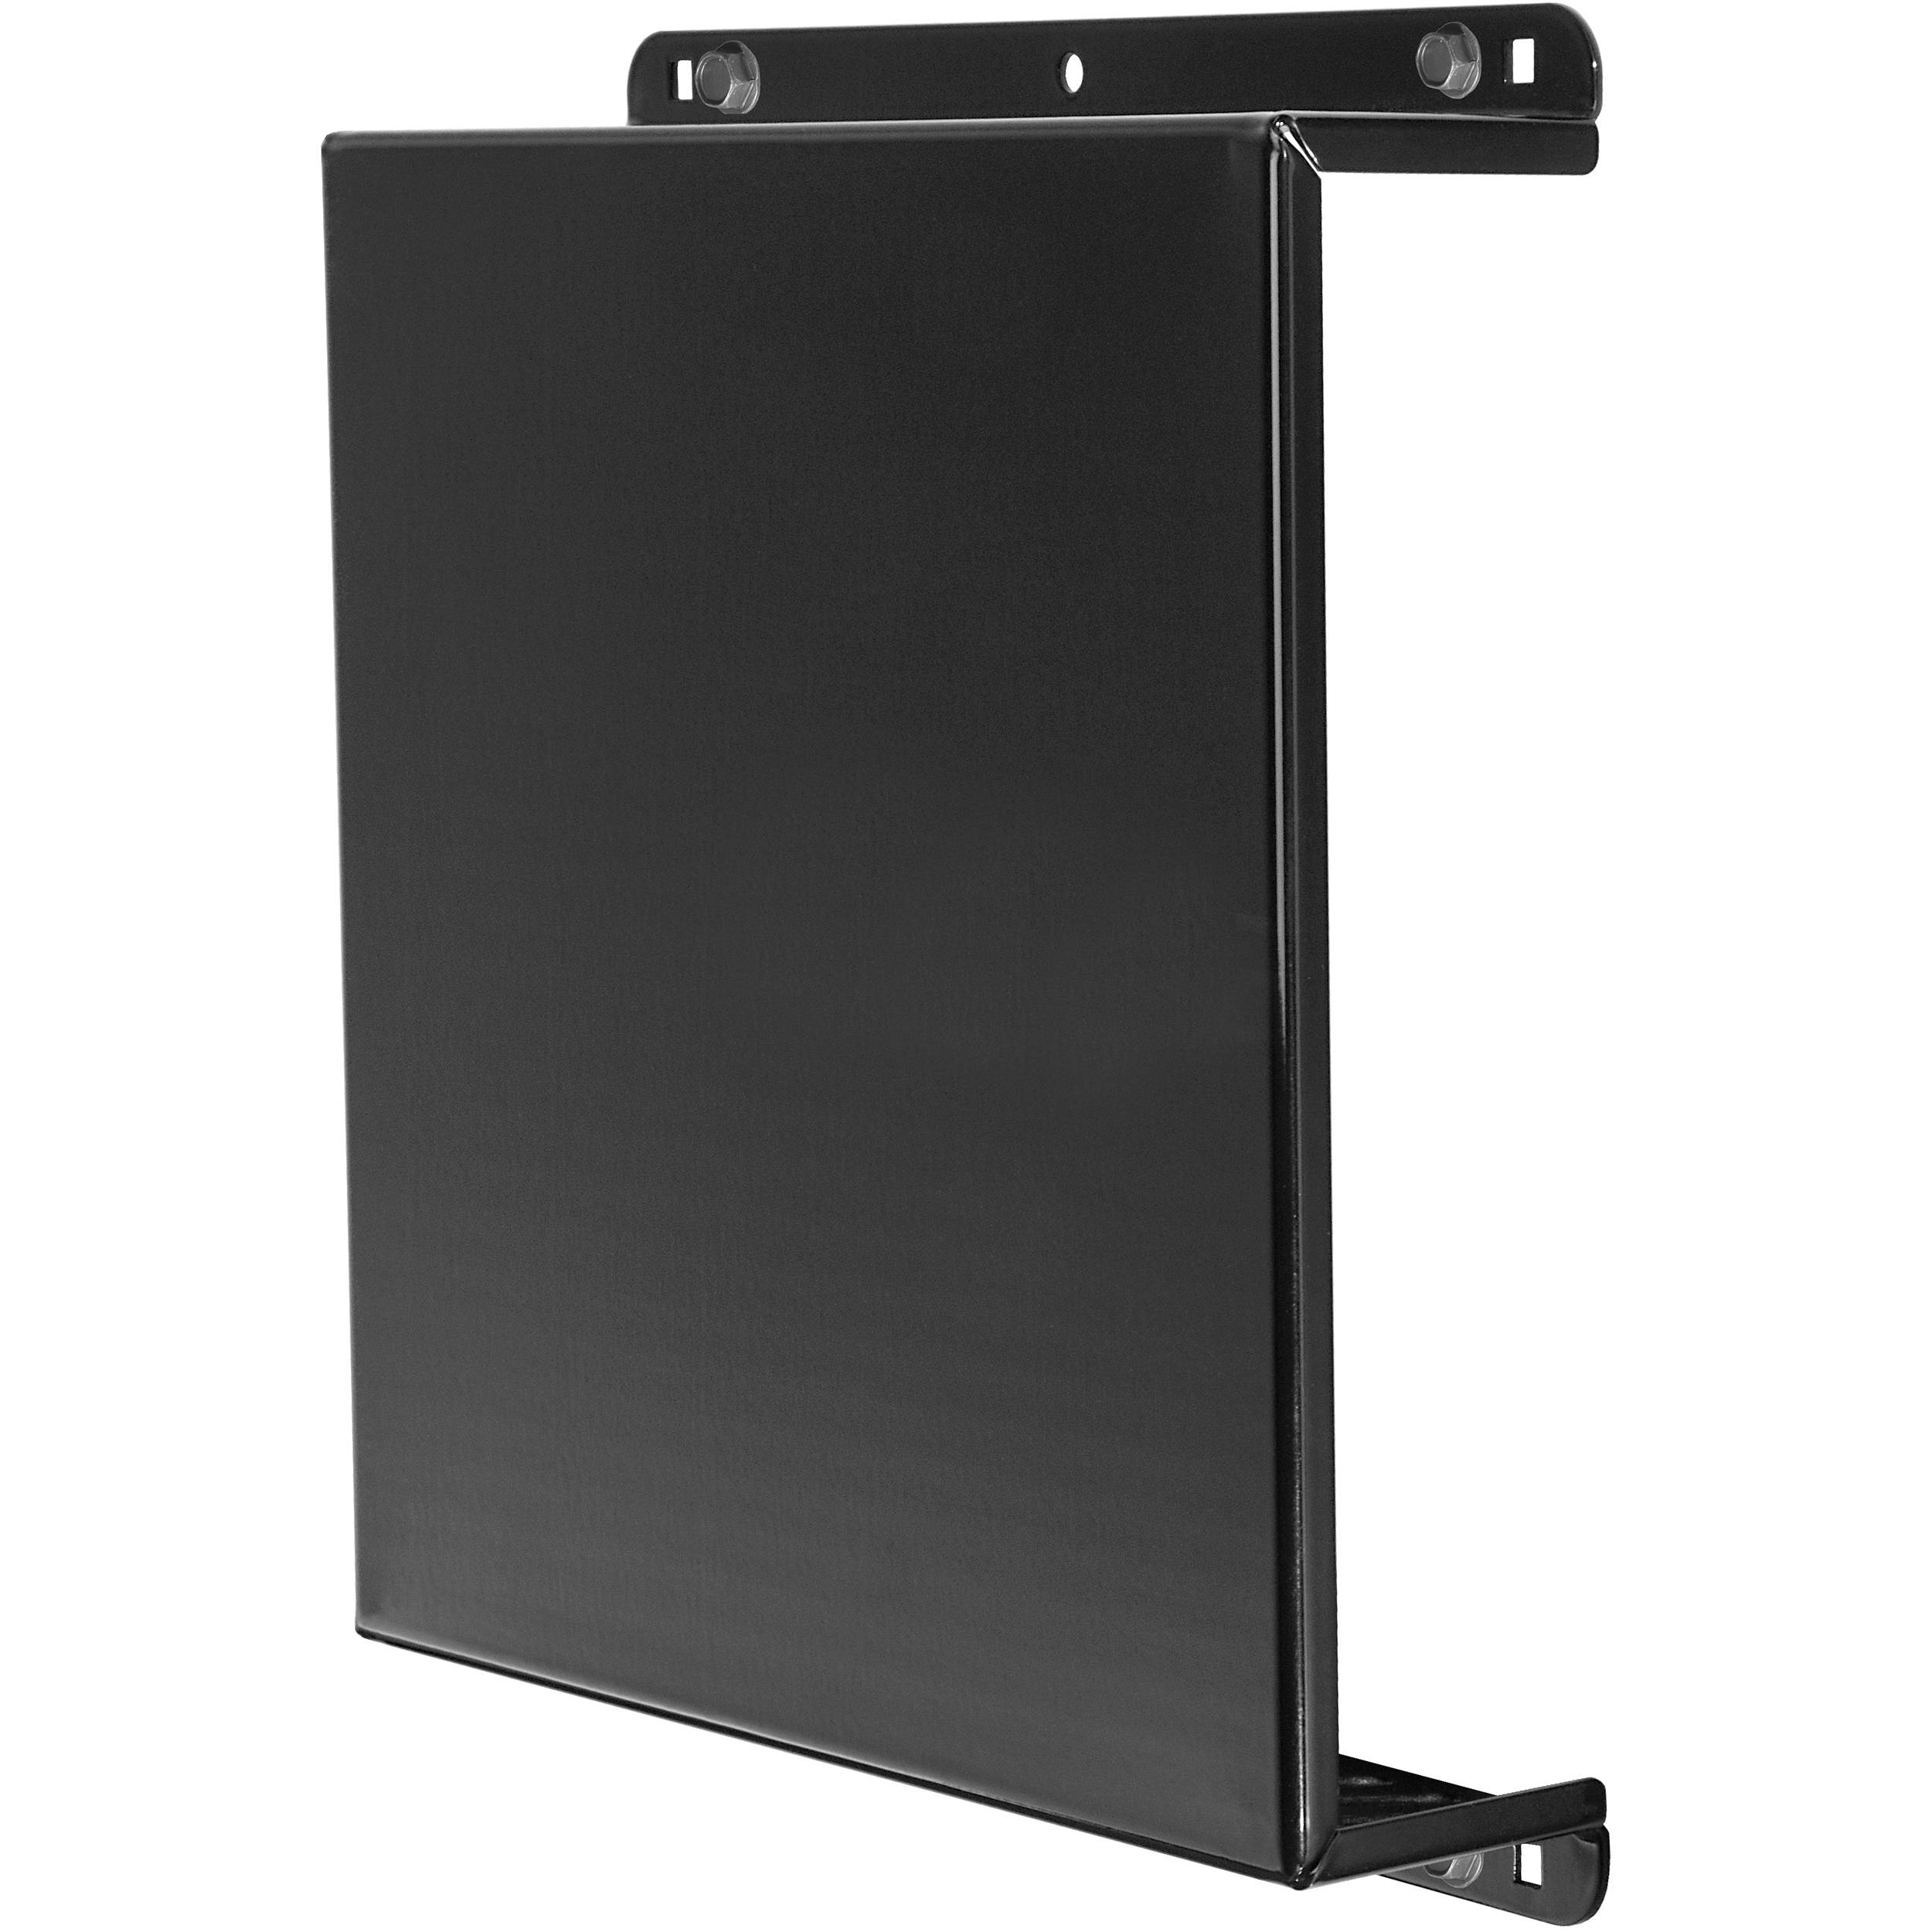 ps3 wall mount